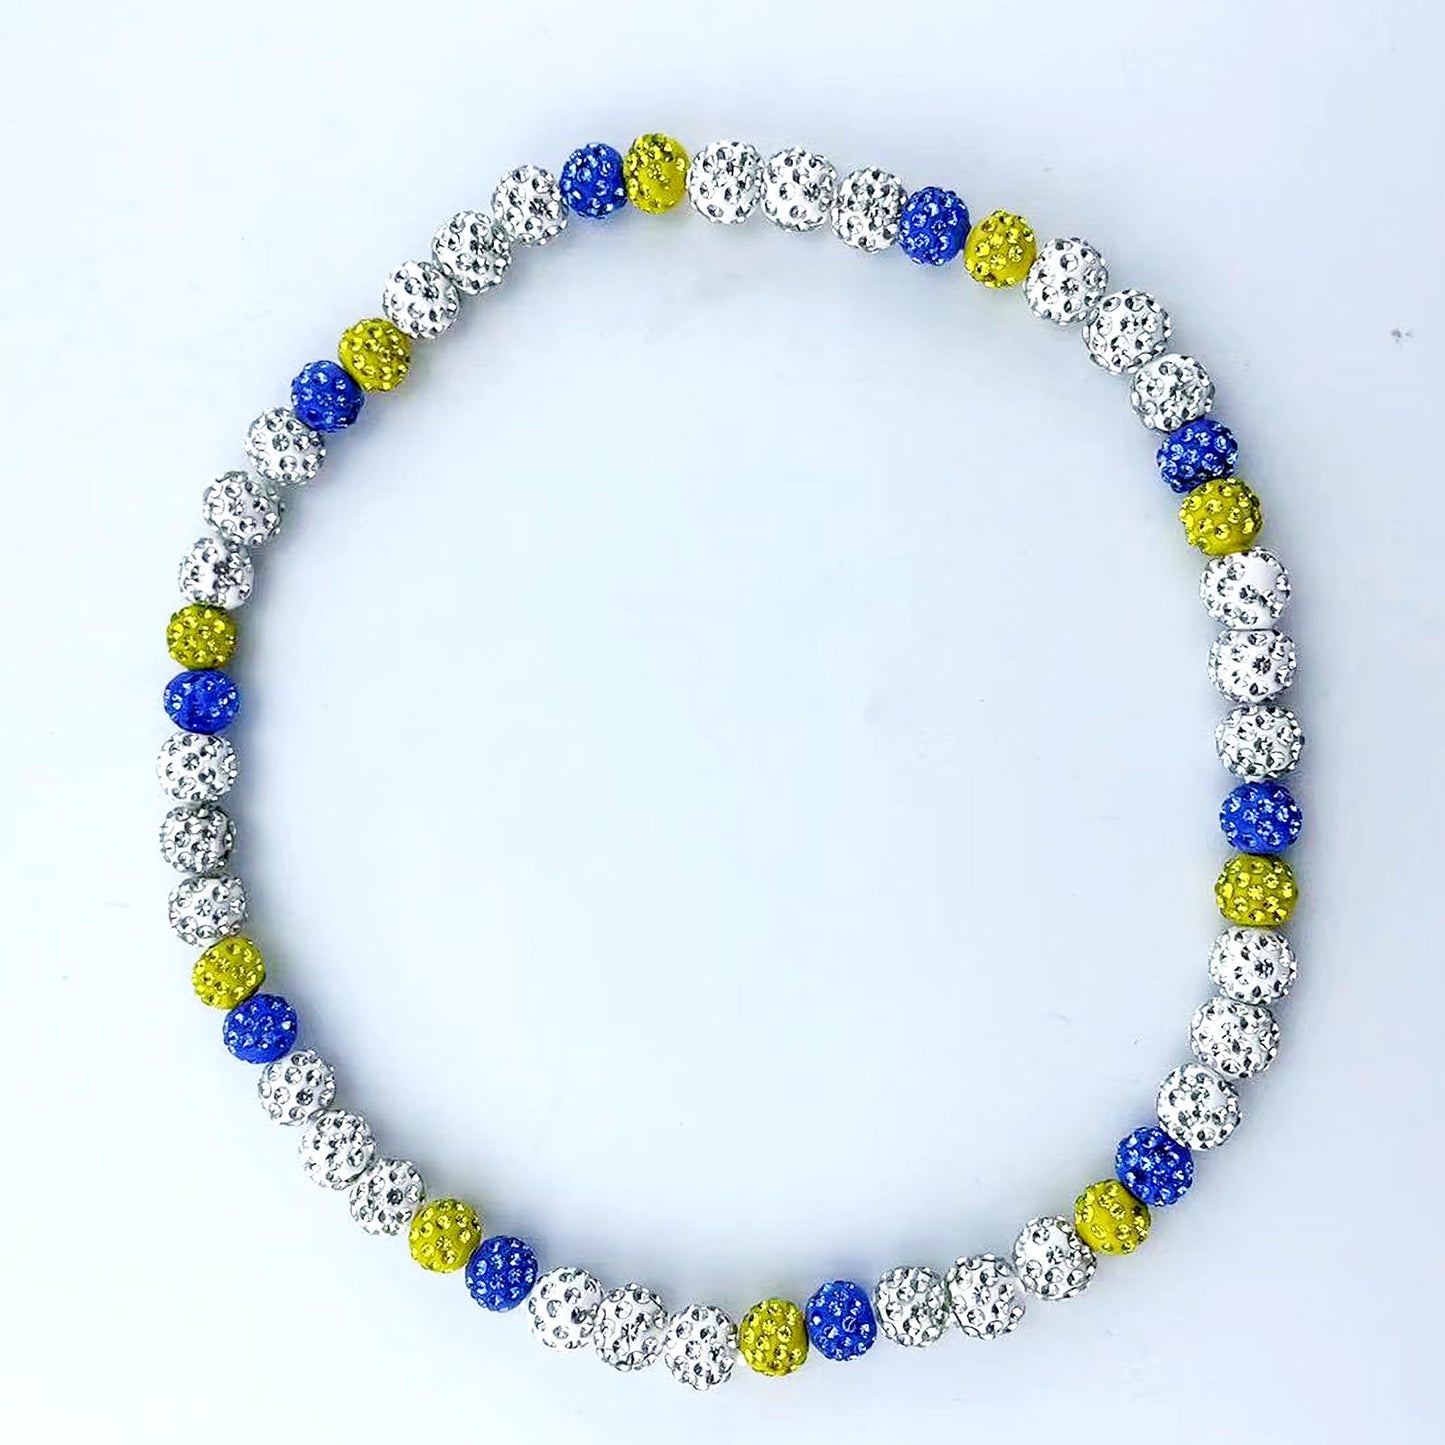 Bling Baseball Necklace for Competitive Athletes,Ice Collection Necklace Glitter Rhinestone Ball Necklaces for Men Boys Inspired Sports Jewelry Gift Accessory 16" 18" 20" (16 inch, Yellow White Blue) - TravelBall